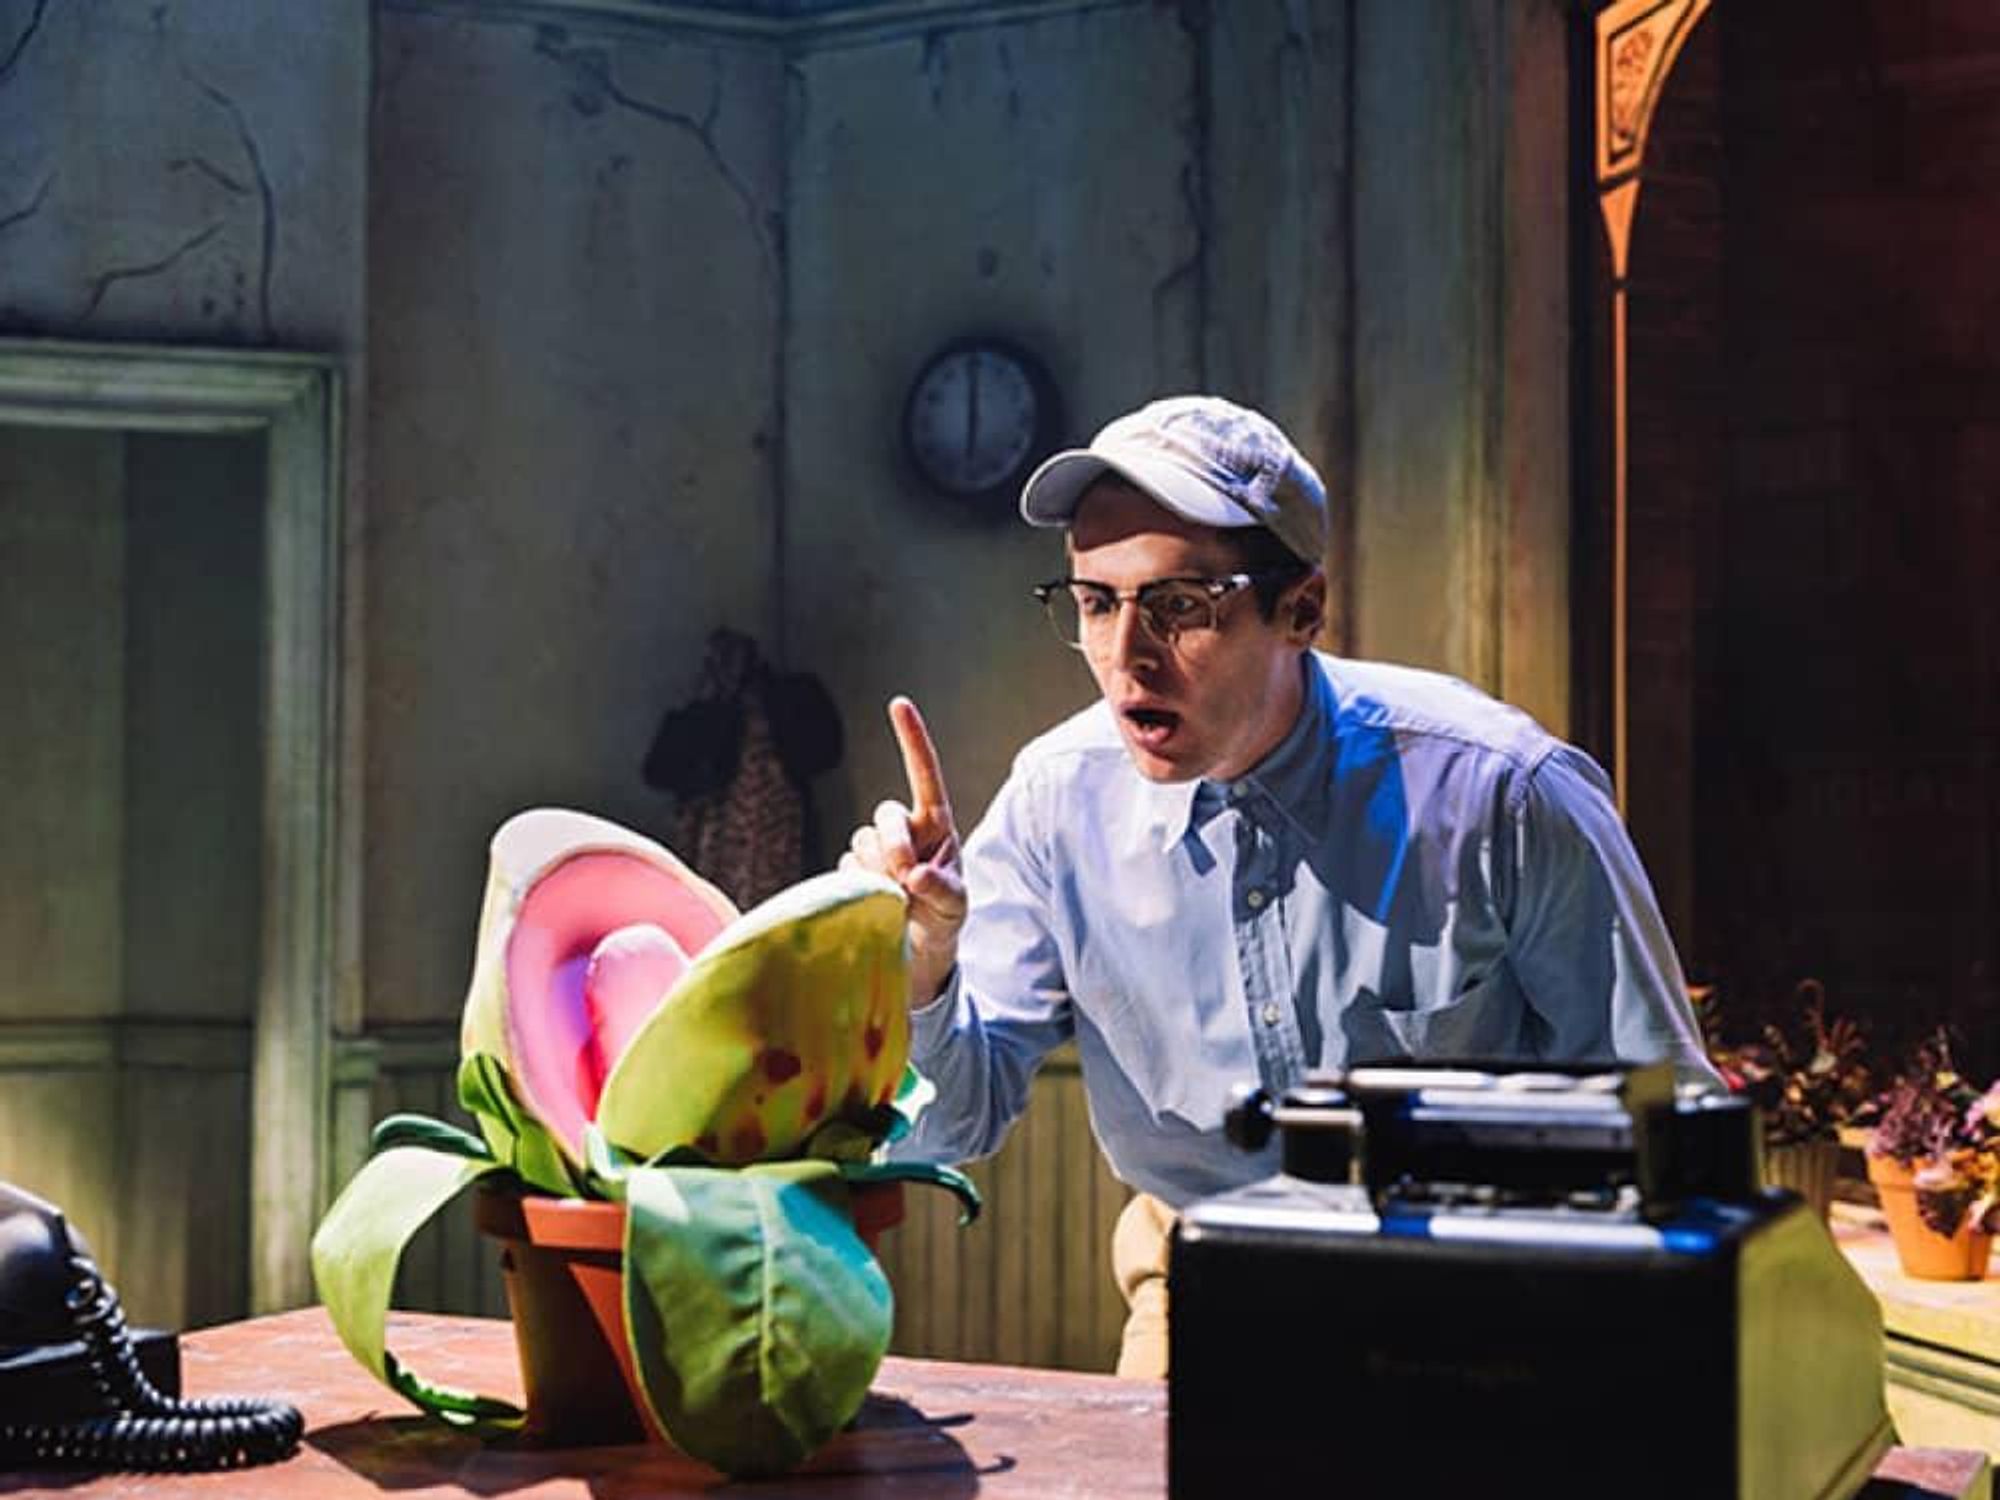 2019 Off Broadway revival of Little Shop of Horrors